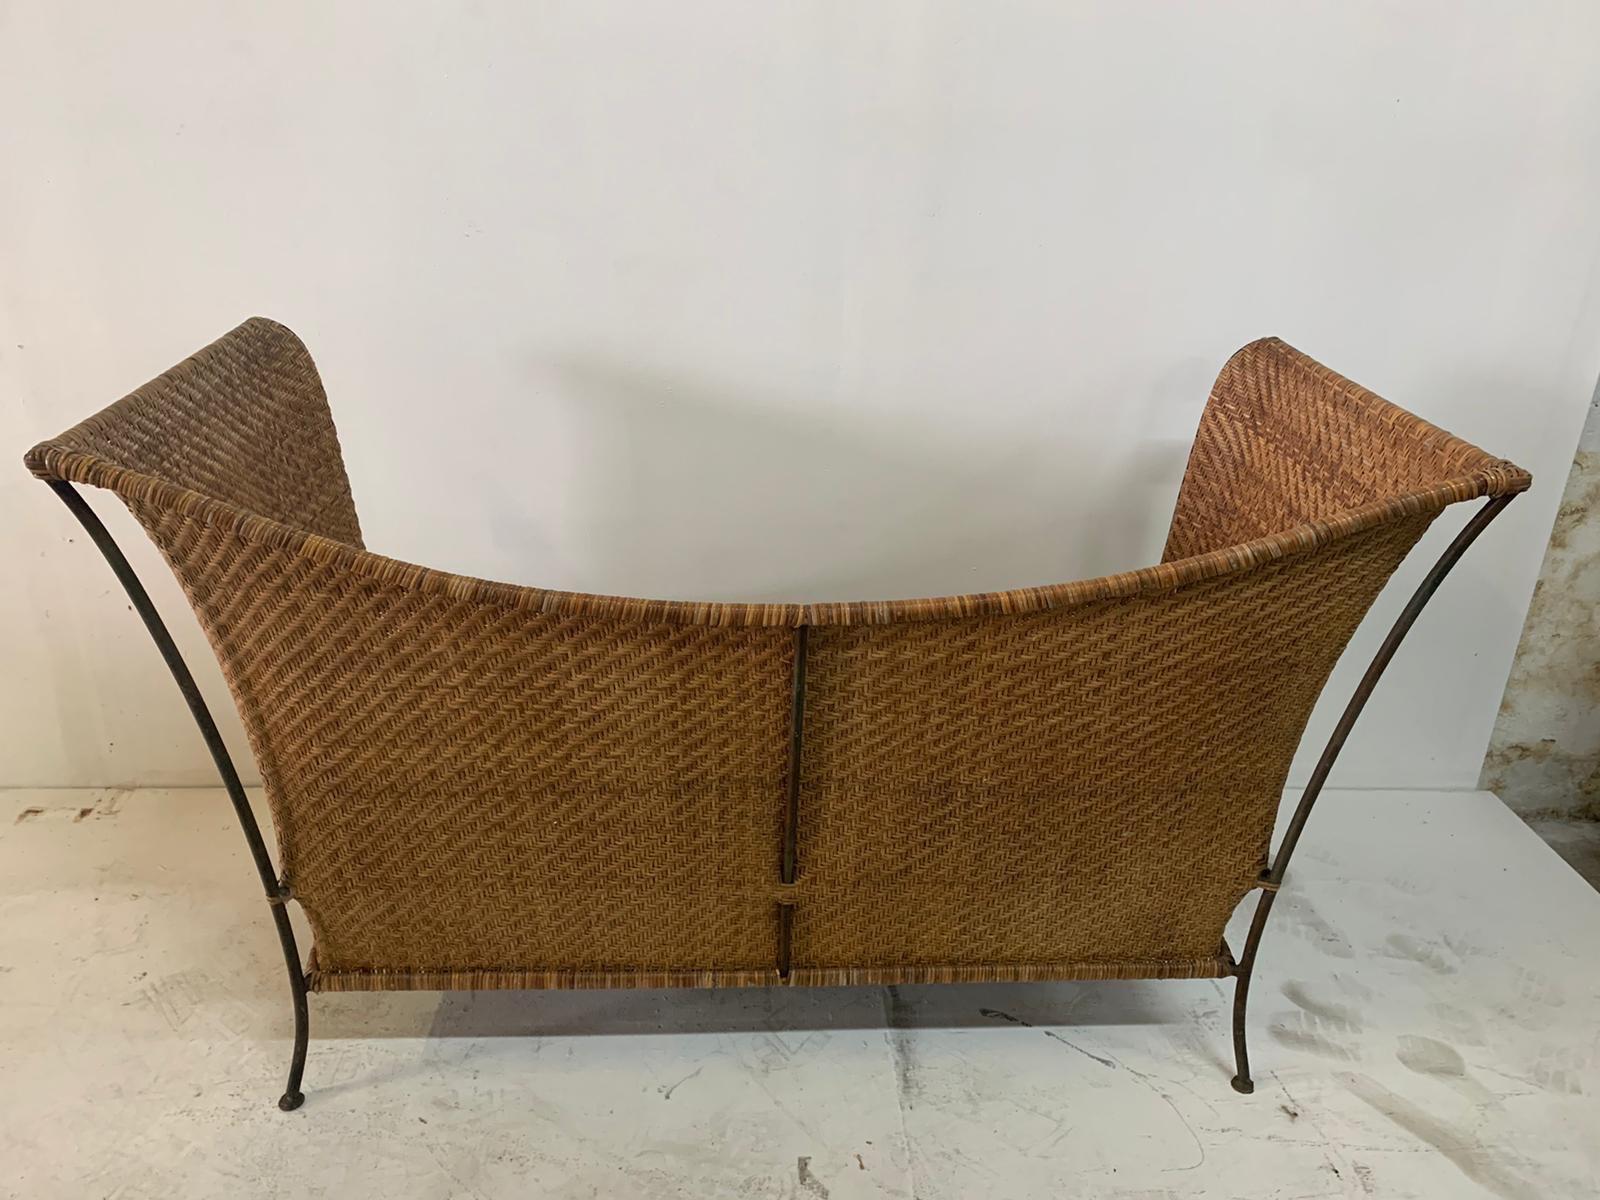 American Mid-Century Modern Woven Wicker and Iron Canapé/Sofa